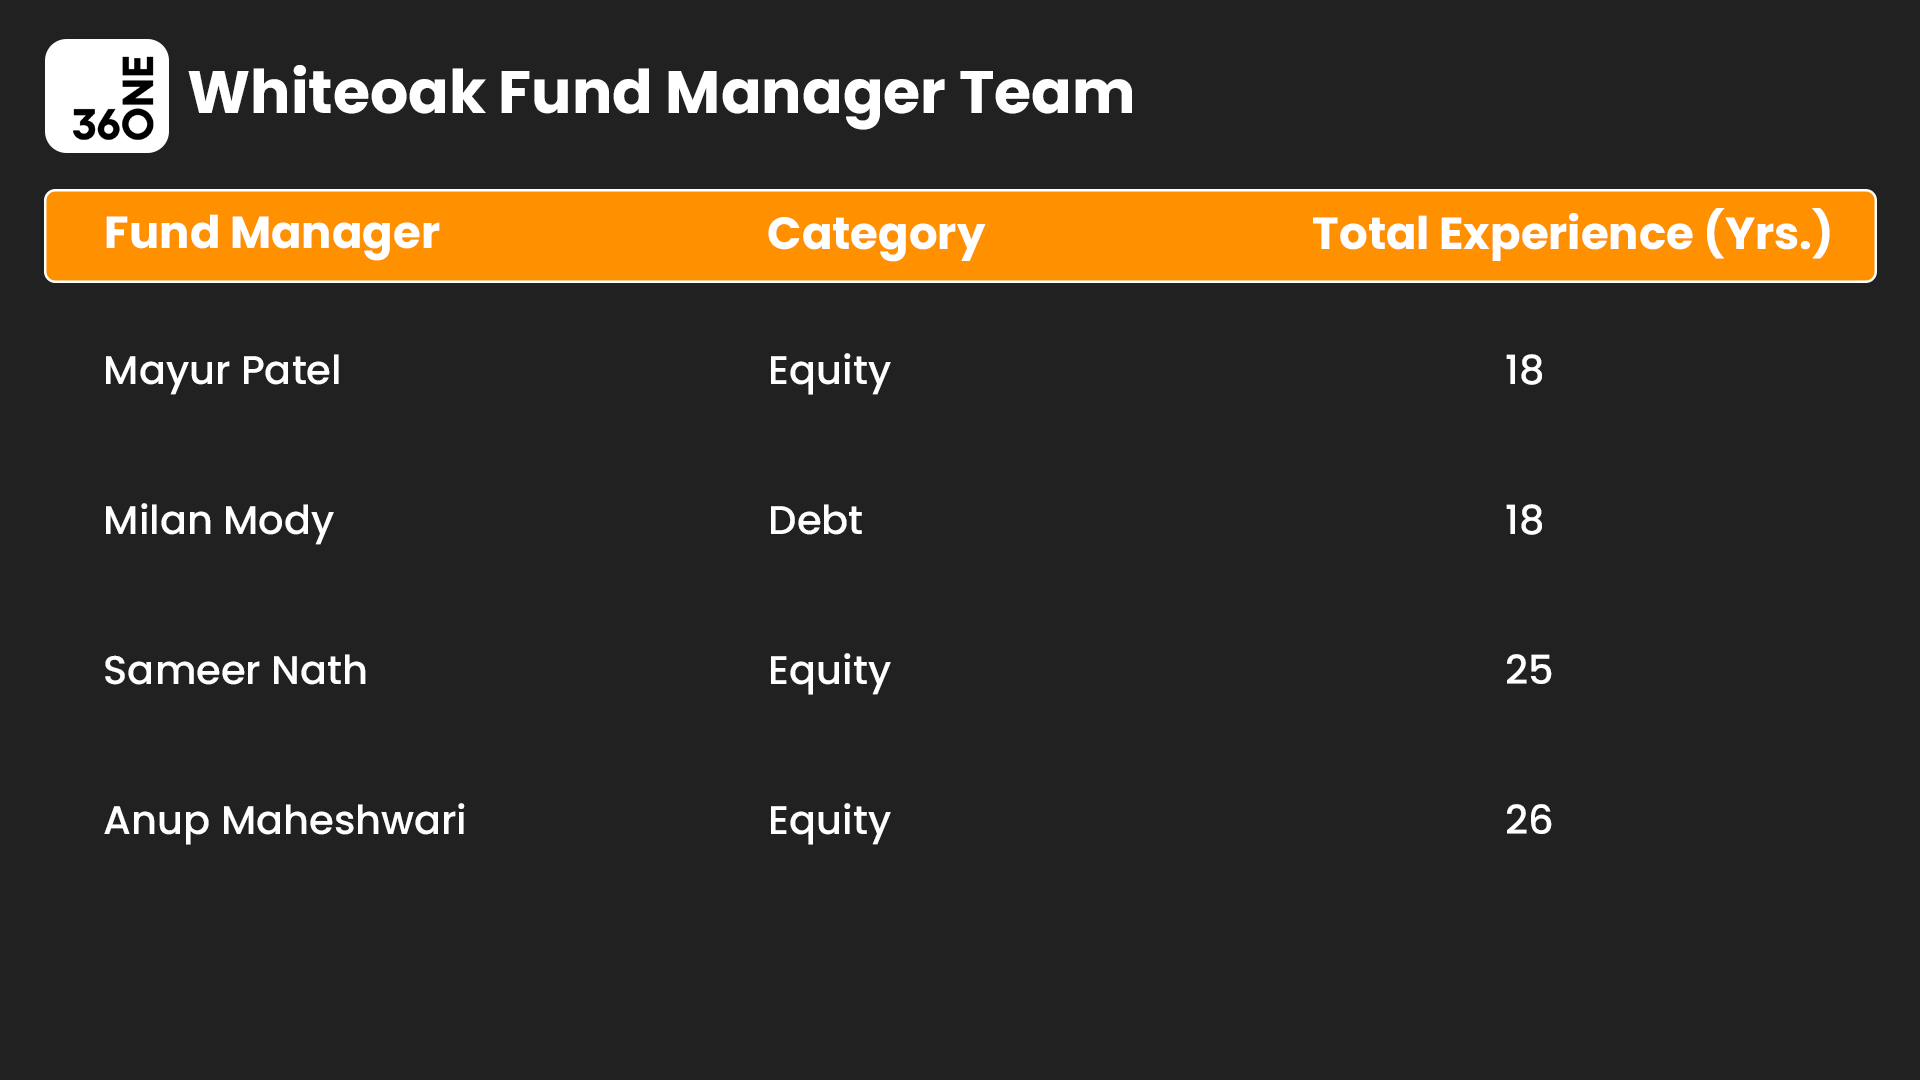 List of Fund Manager 360 one mutual funds